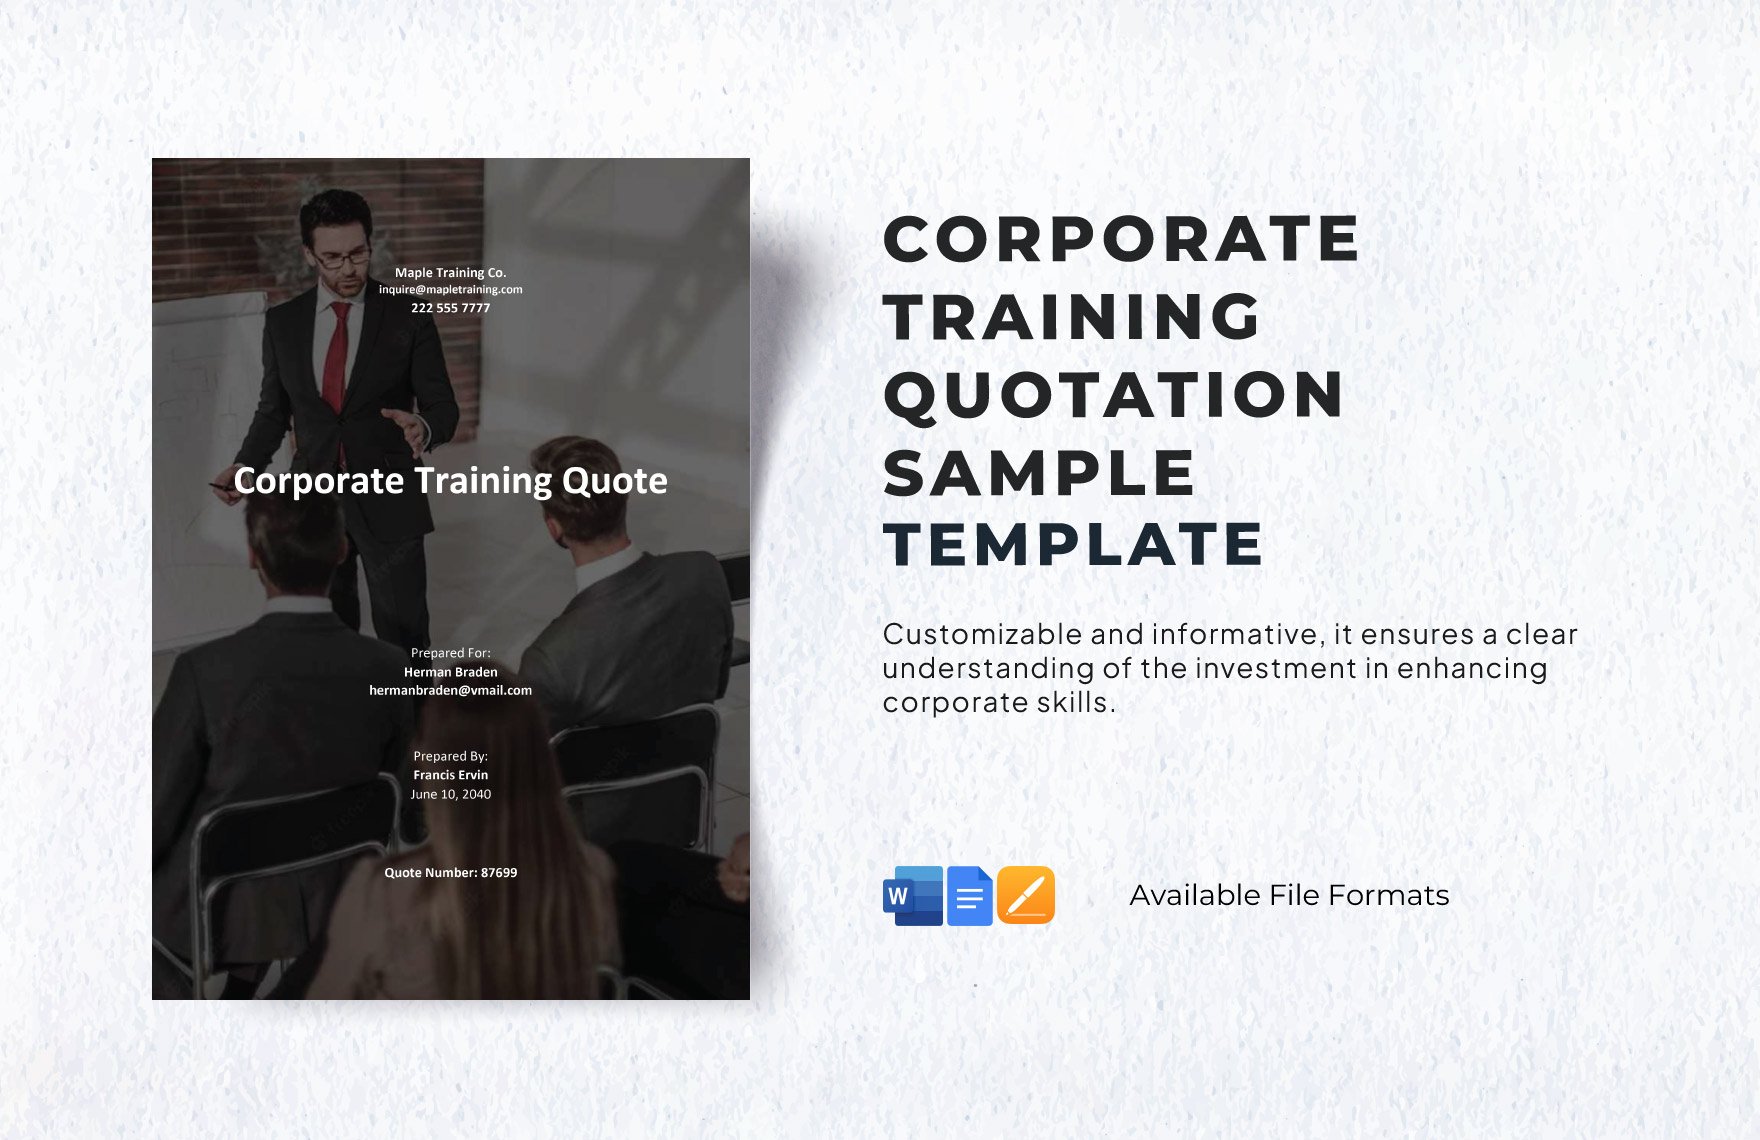 Corporate Training Quotation Sample Template